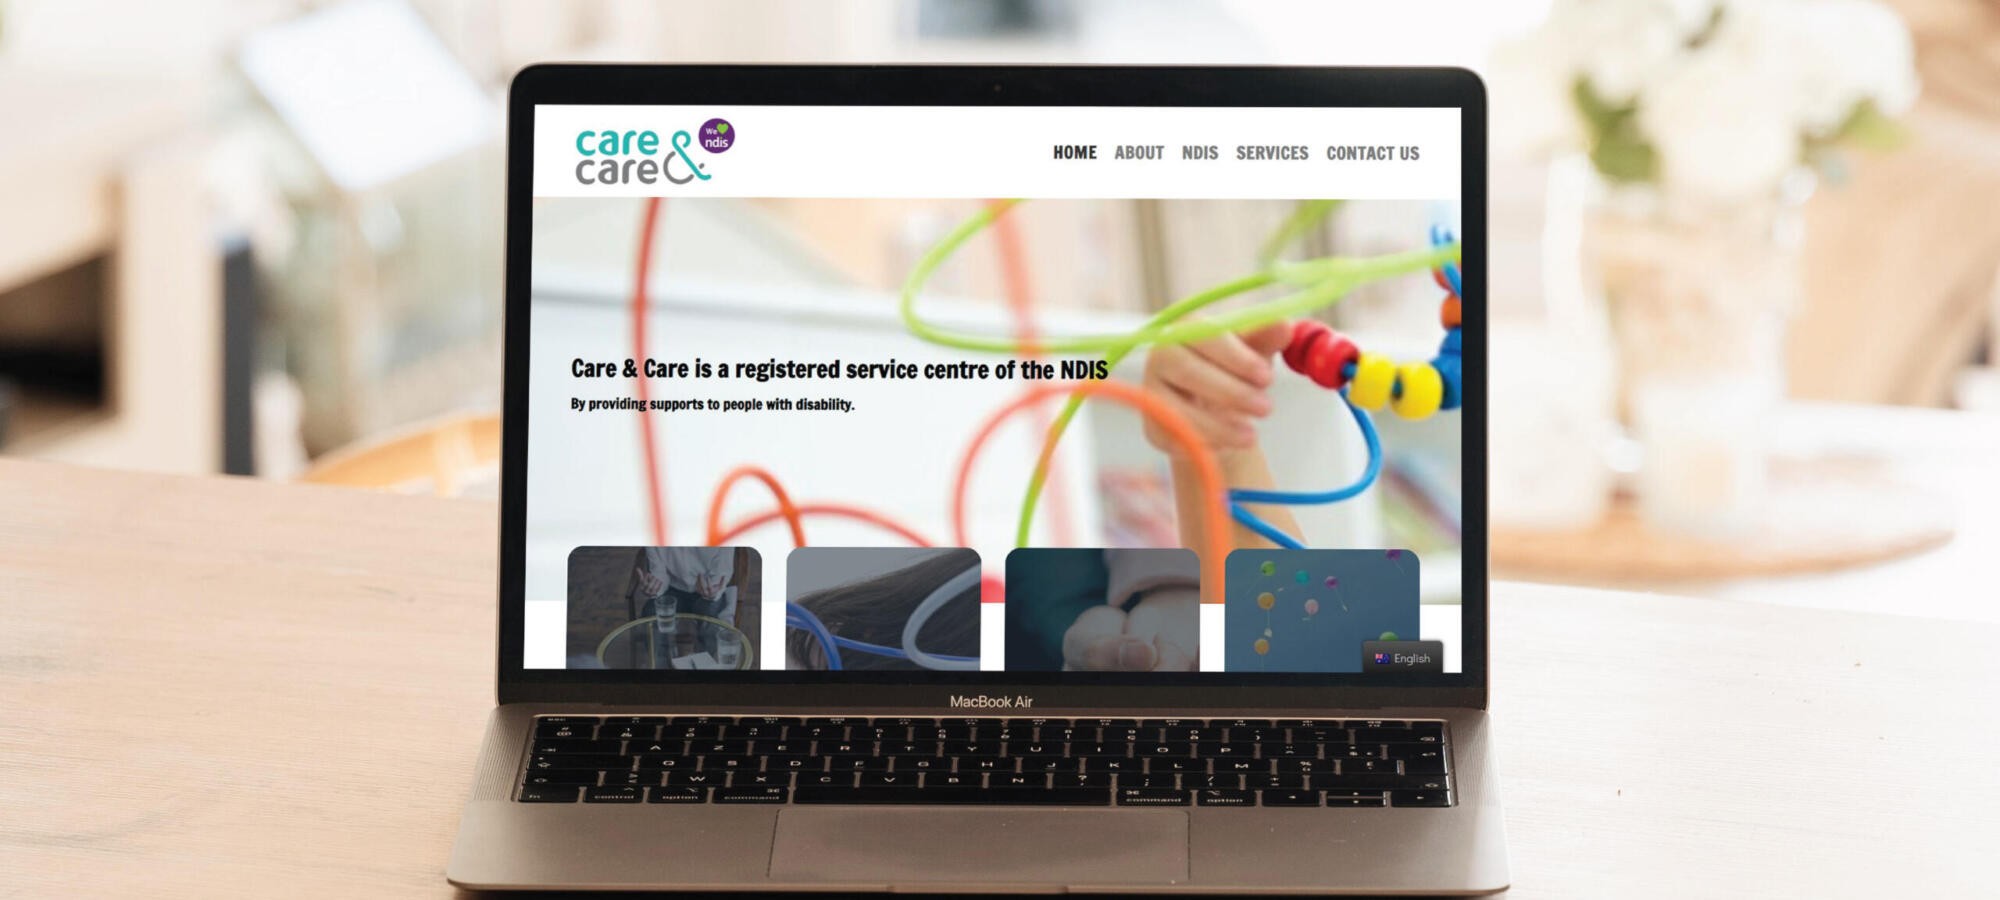 care and care homepage design mockup